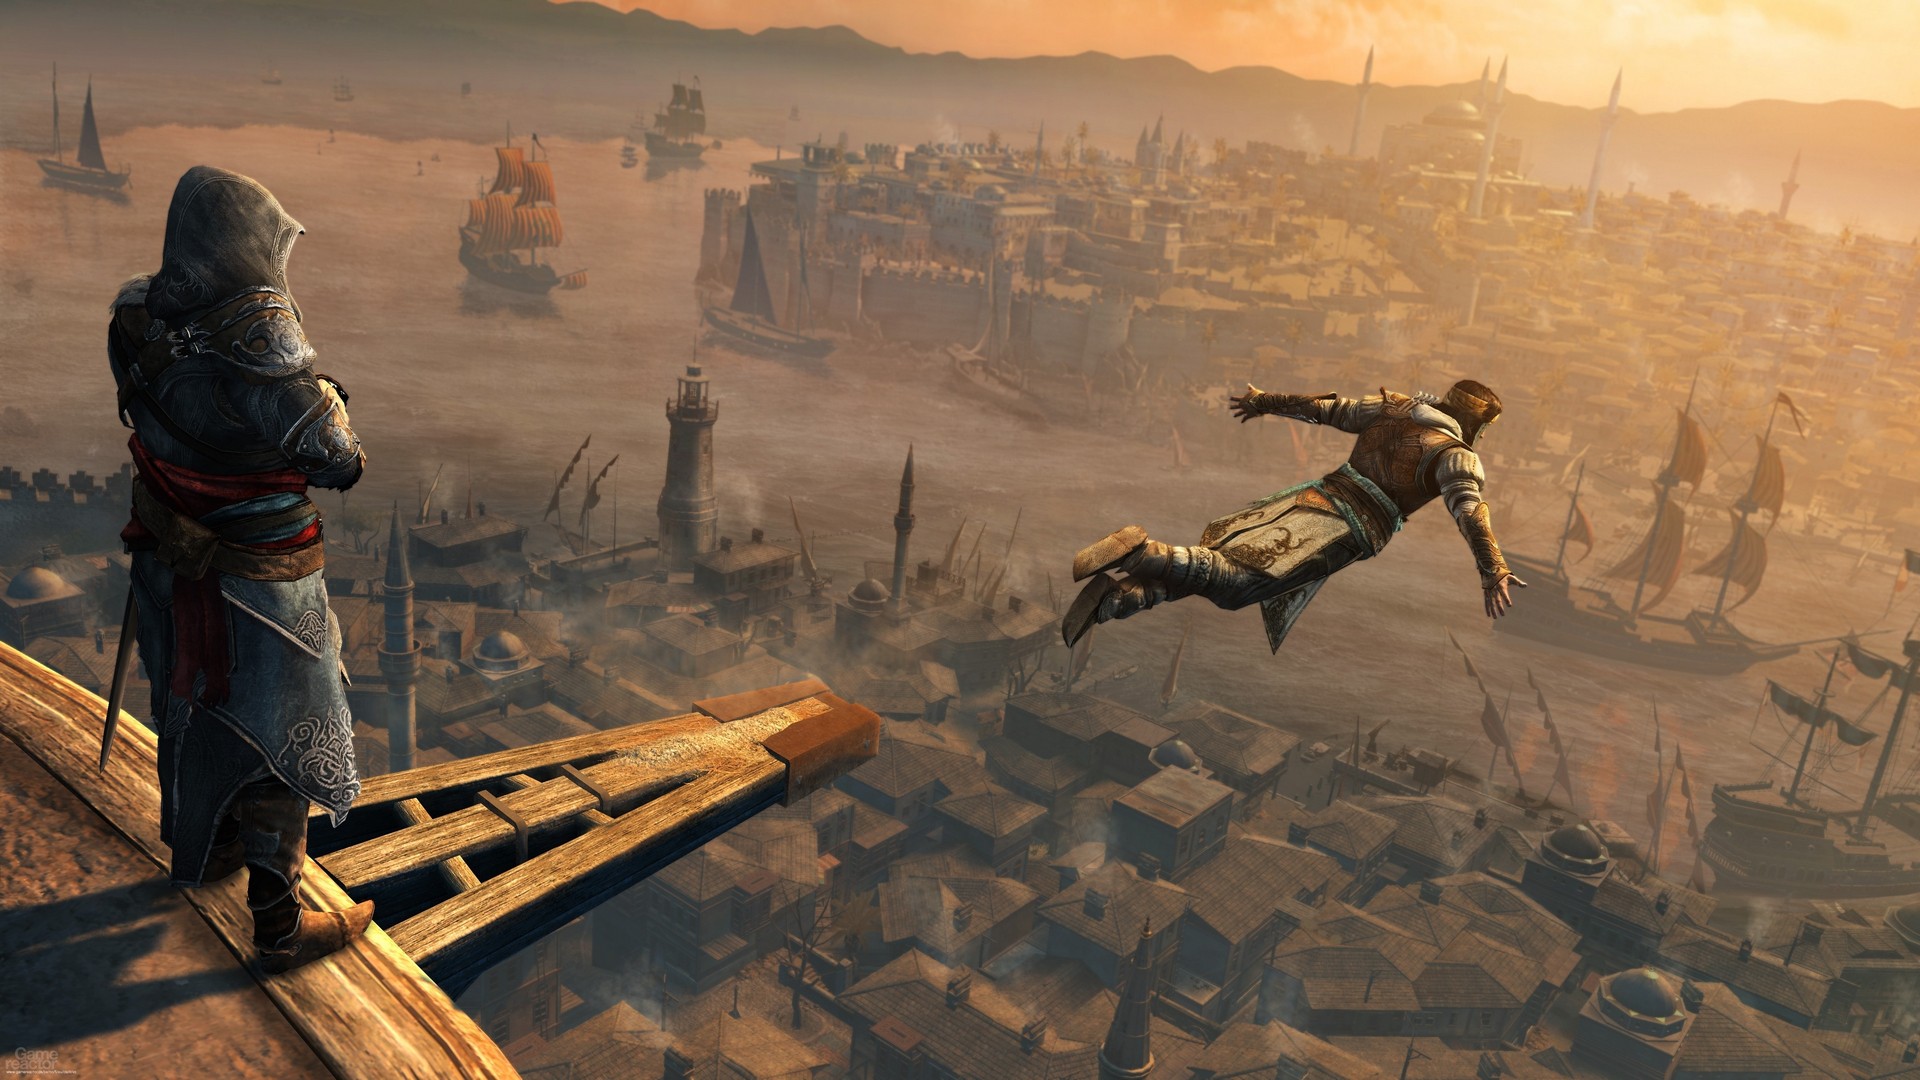 Wallpapers video games leap assassins creed on the desktop